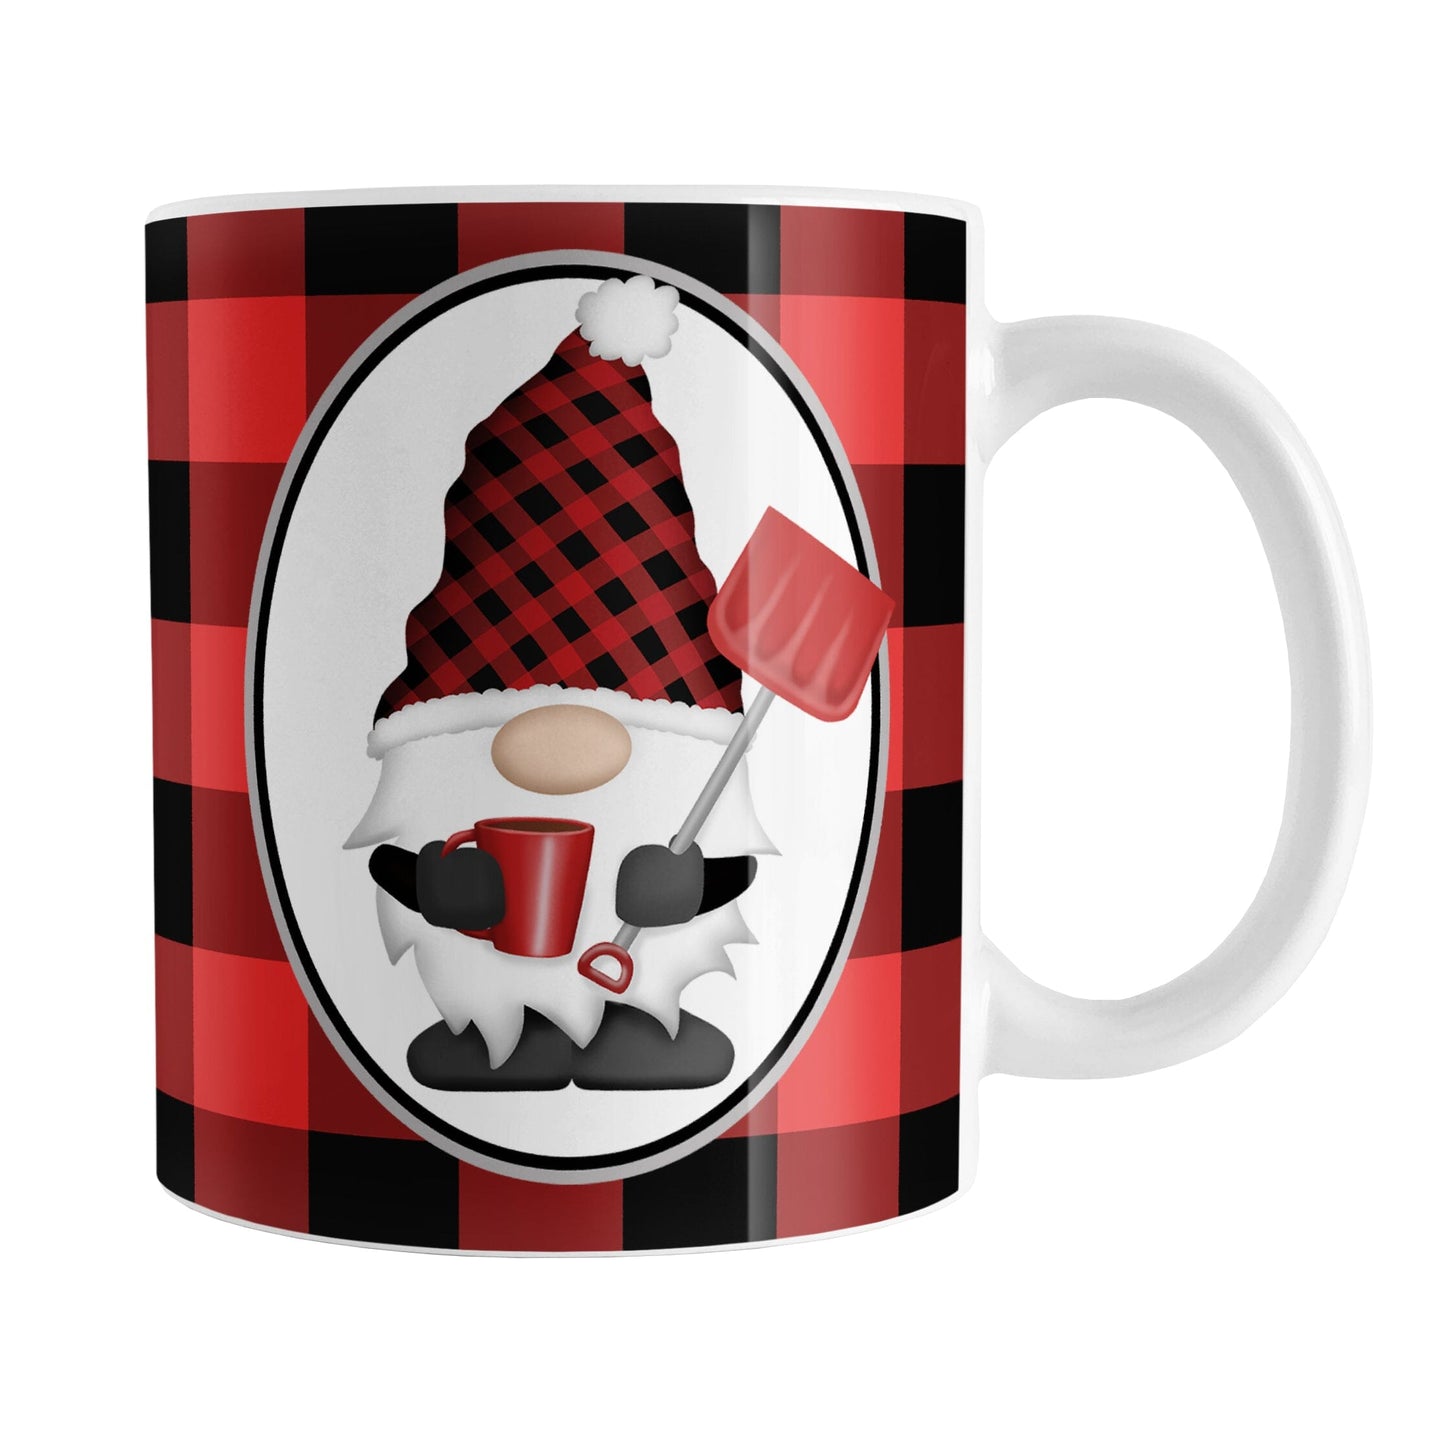 Red Gnome Buffalo Plaid Mug (11oz) at Amy's Coffee Mug. A ceramic coffee mug designed with an adorable gnome wearing a red and black buffalo check hat and holding a hot beverage and a snow shovel in a white oval over a red and black buffalo plaid pattern background that wraps around the mug to the handle.